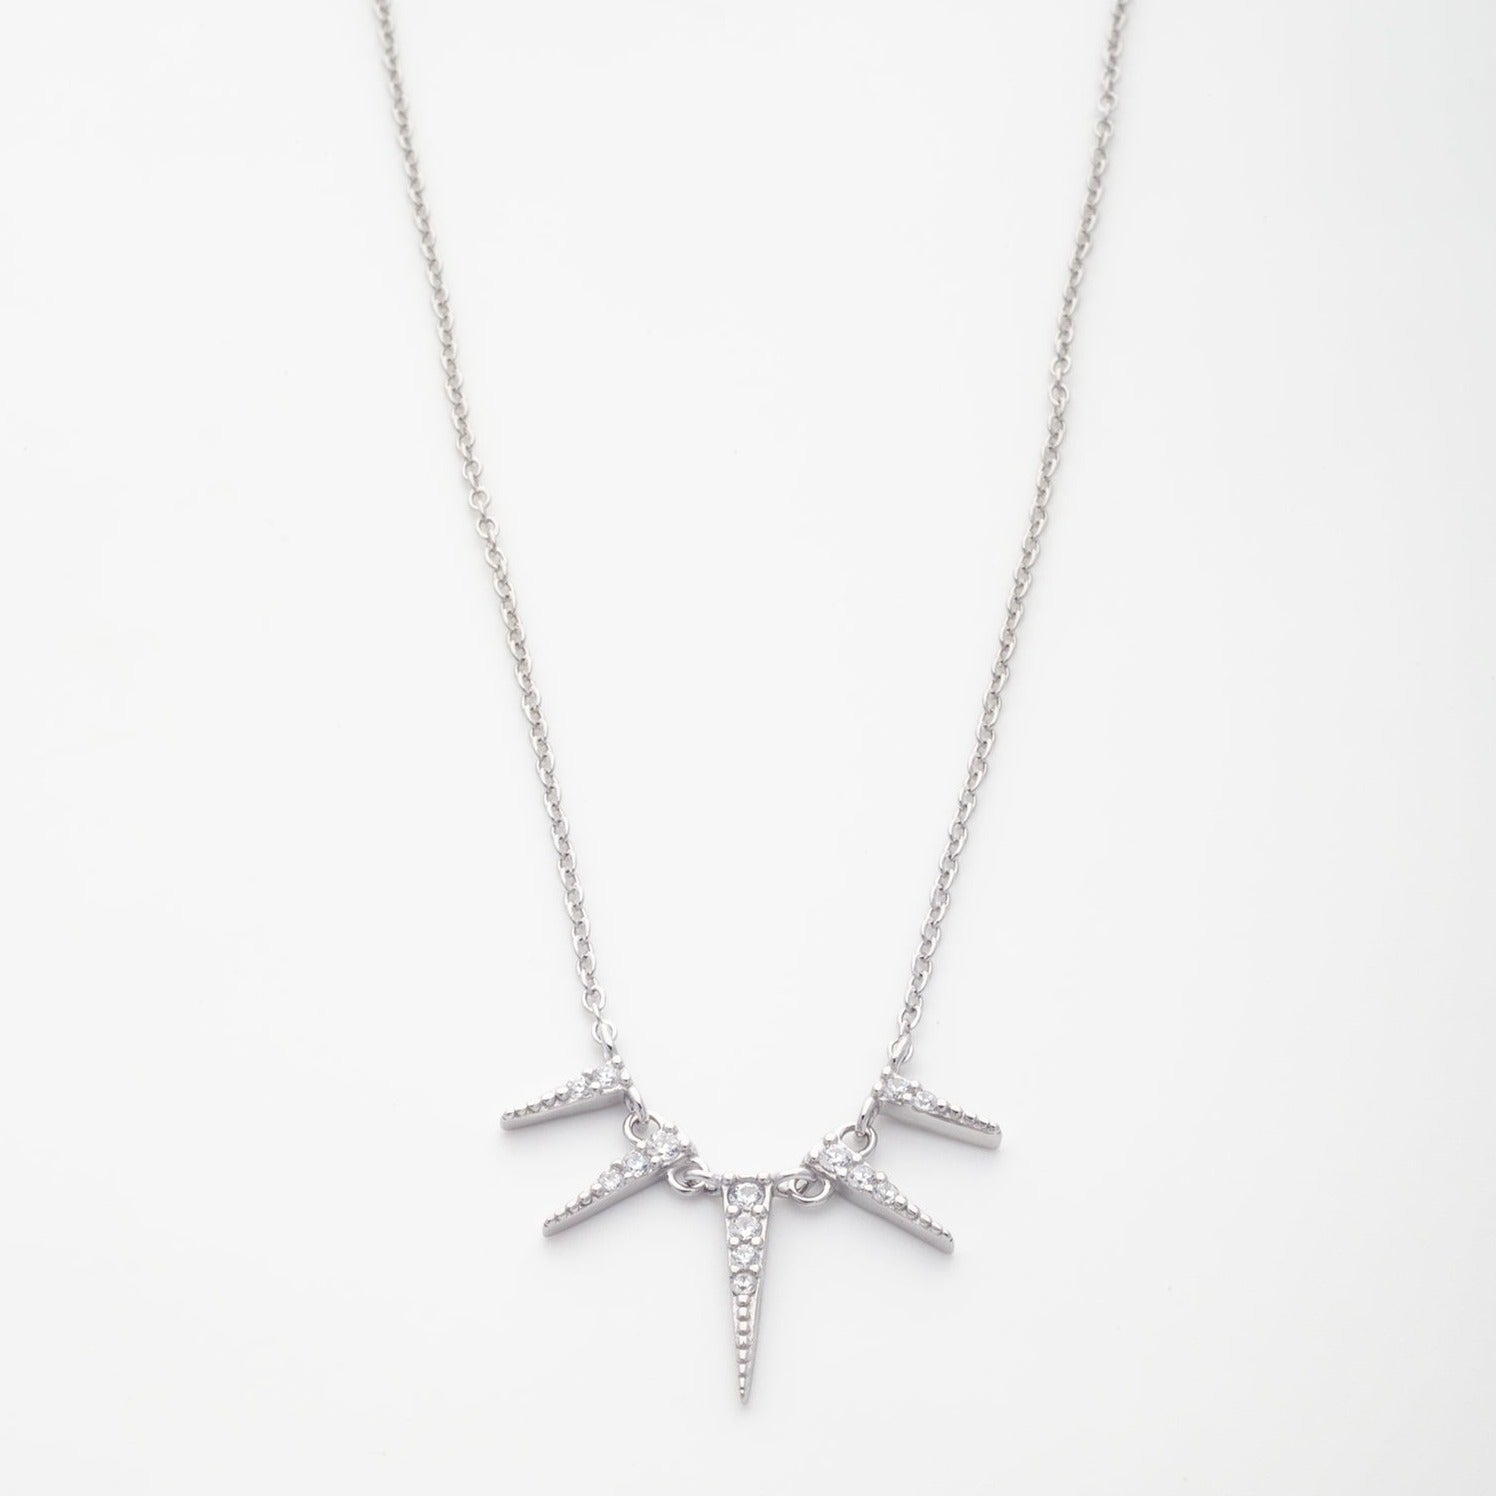 Spiked Pendant Necklace in Silver